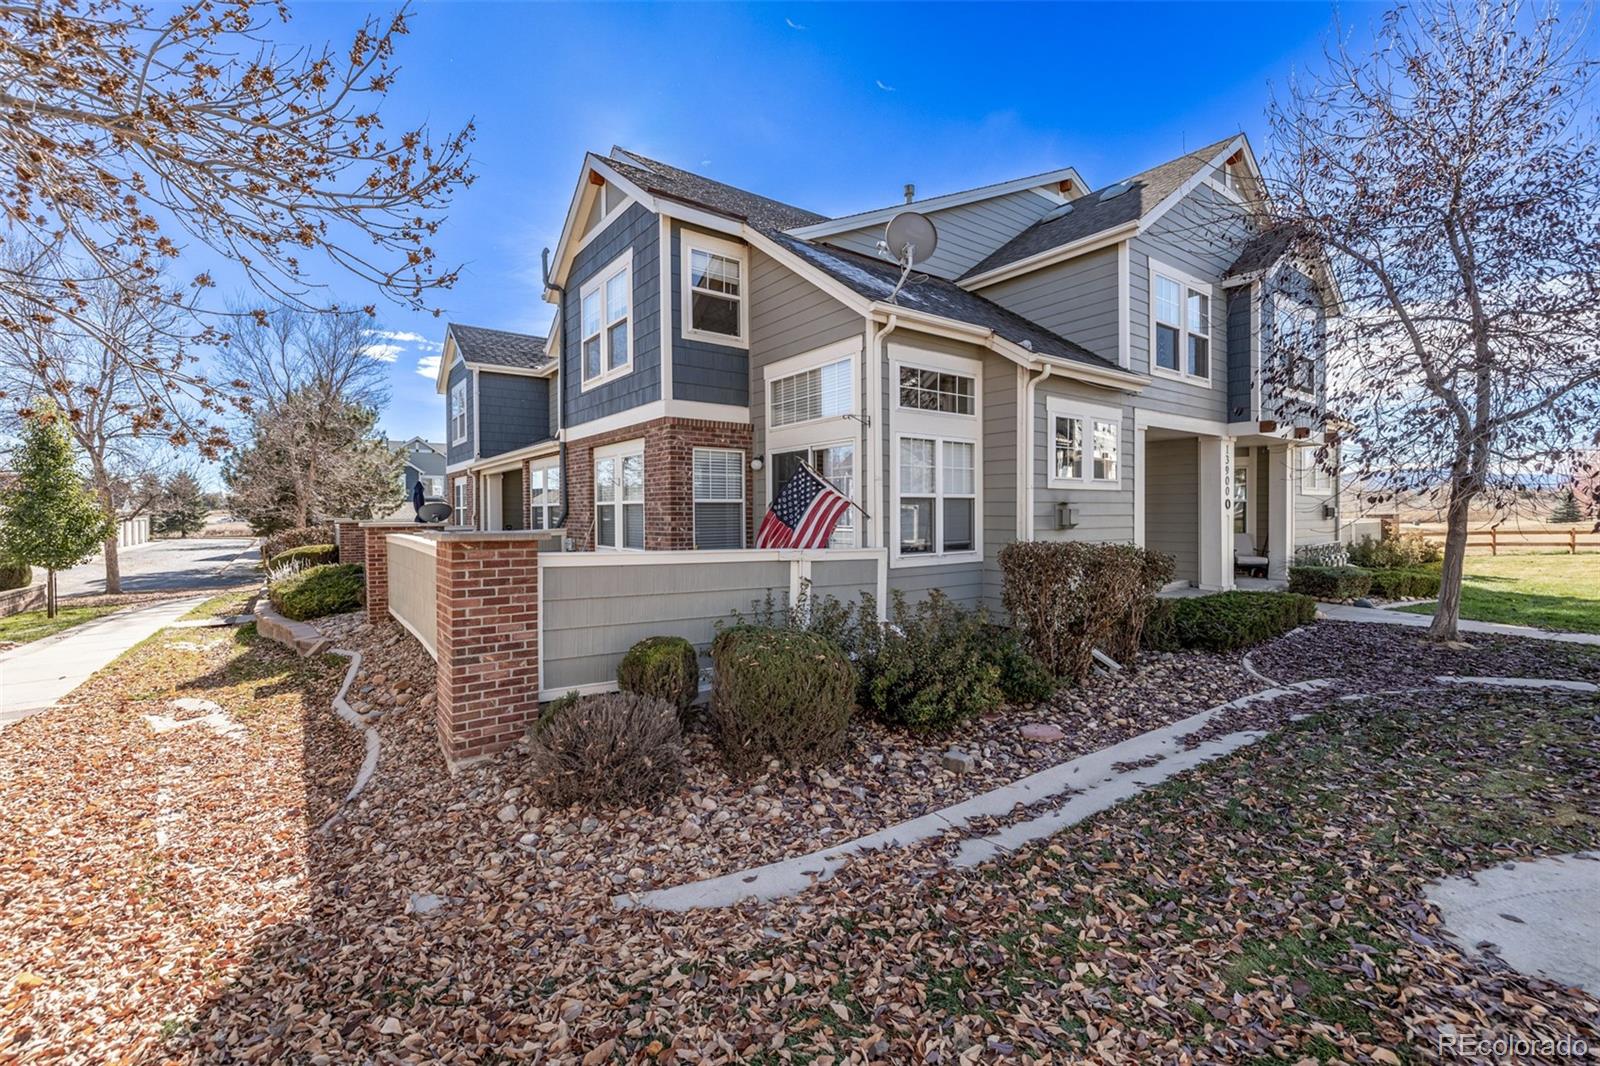 13900  lake song lane, broomfield sold home. Closed on 2023-12-27 for $420,000.